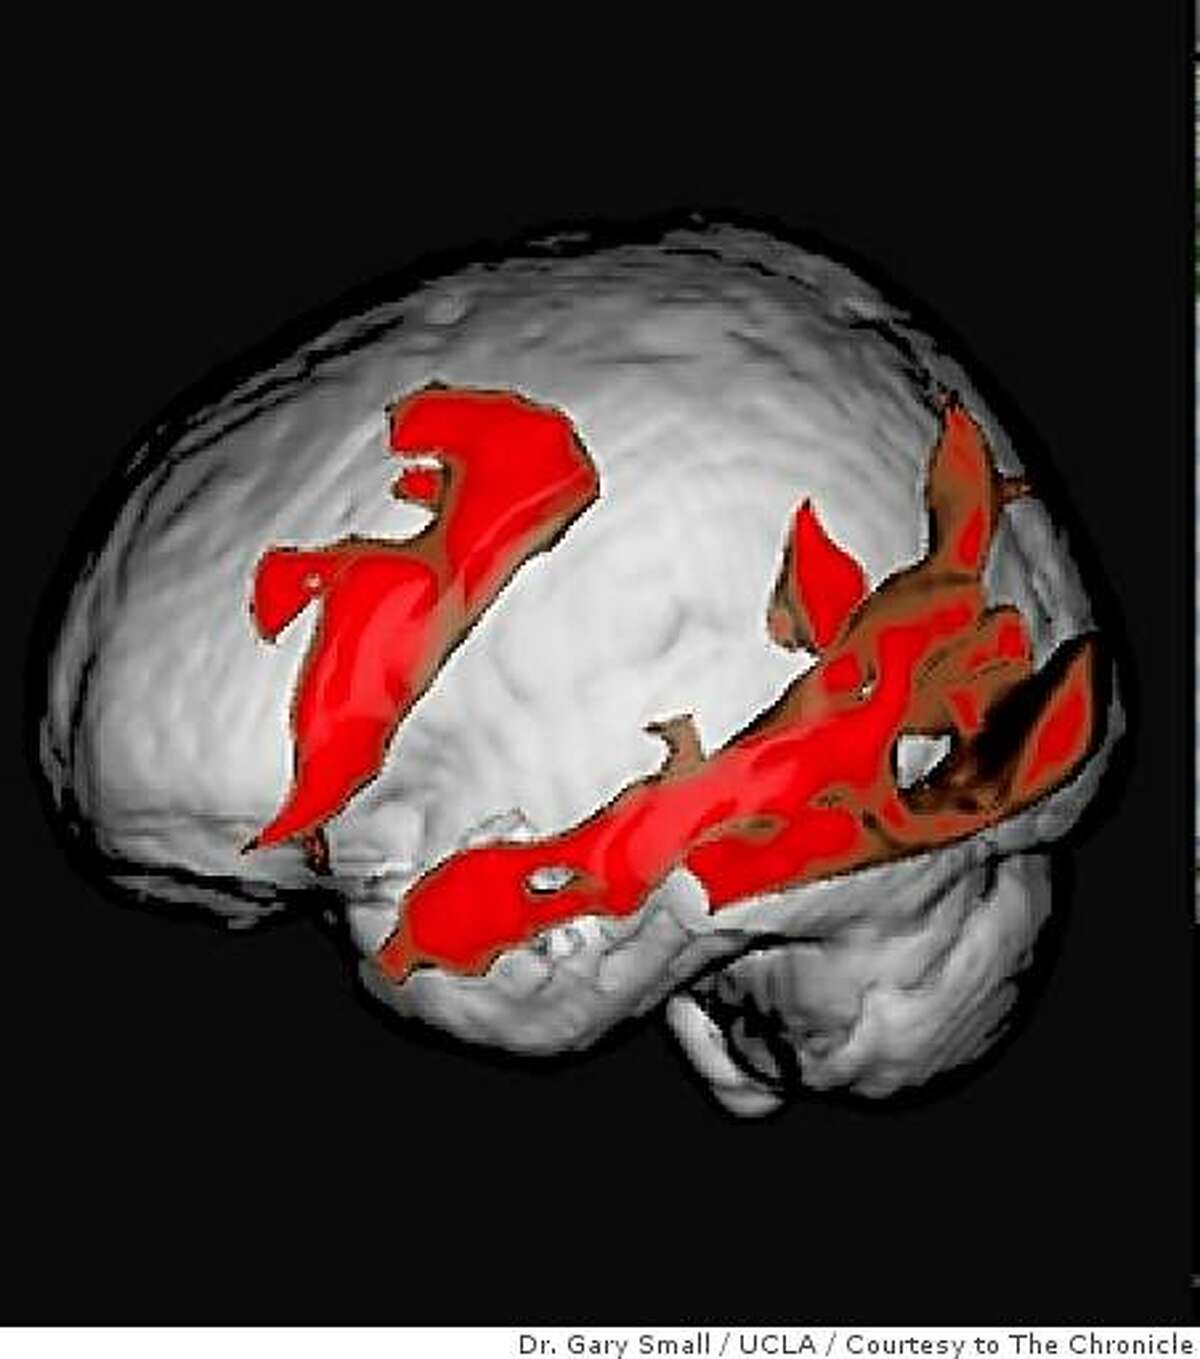 MRI image of an older brain reading book-type text on a screen. Study by Dr. Gary Small, UCLA.